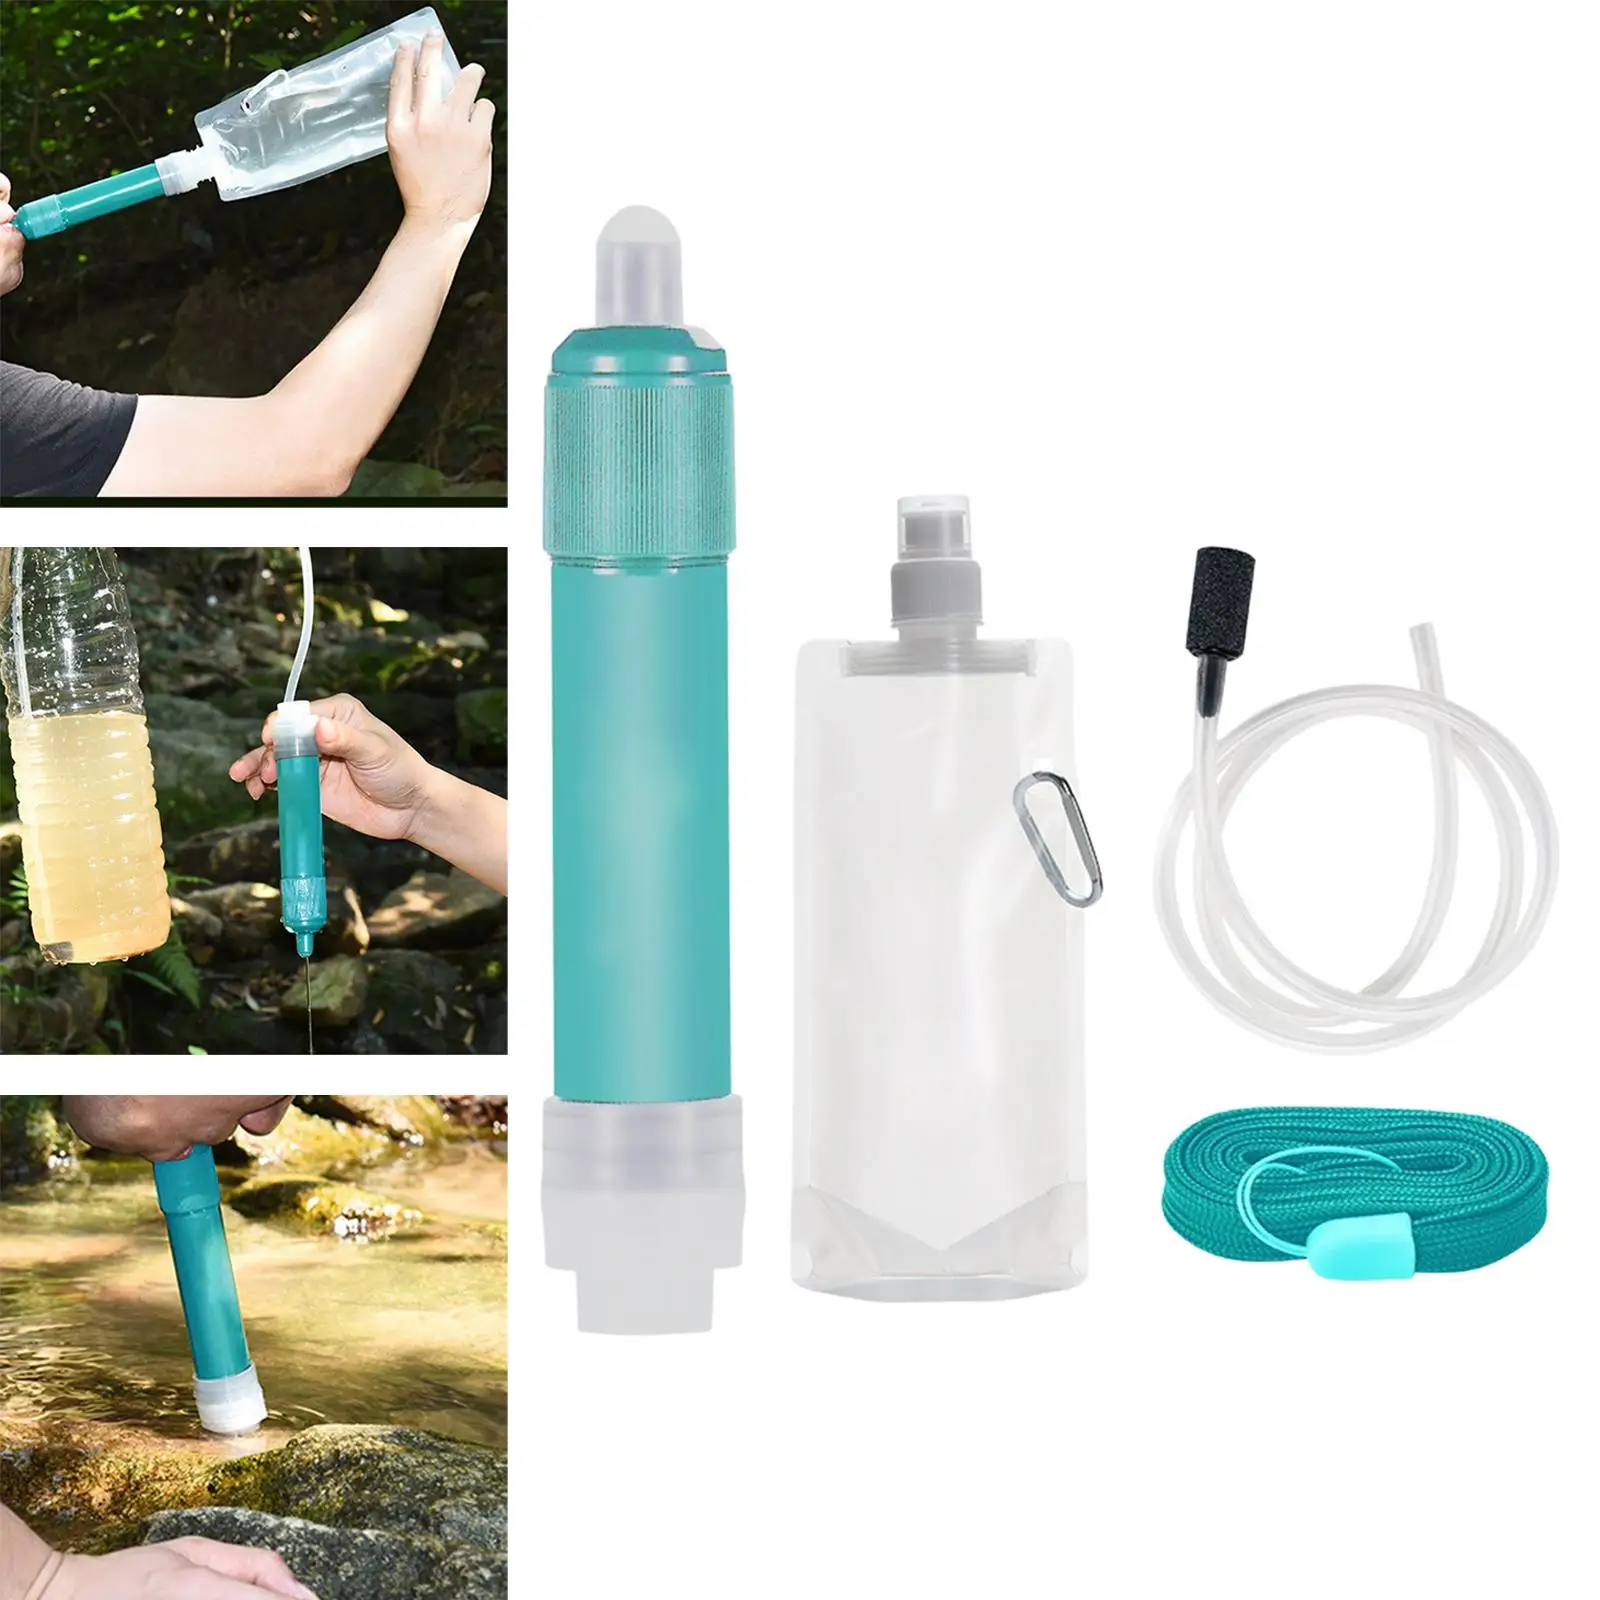 Personal Survival Straw Water Filter Filtration Gear 4000L Equipment System for Team Family Outing Travel